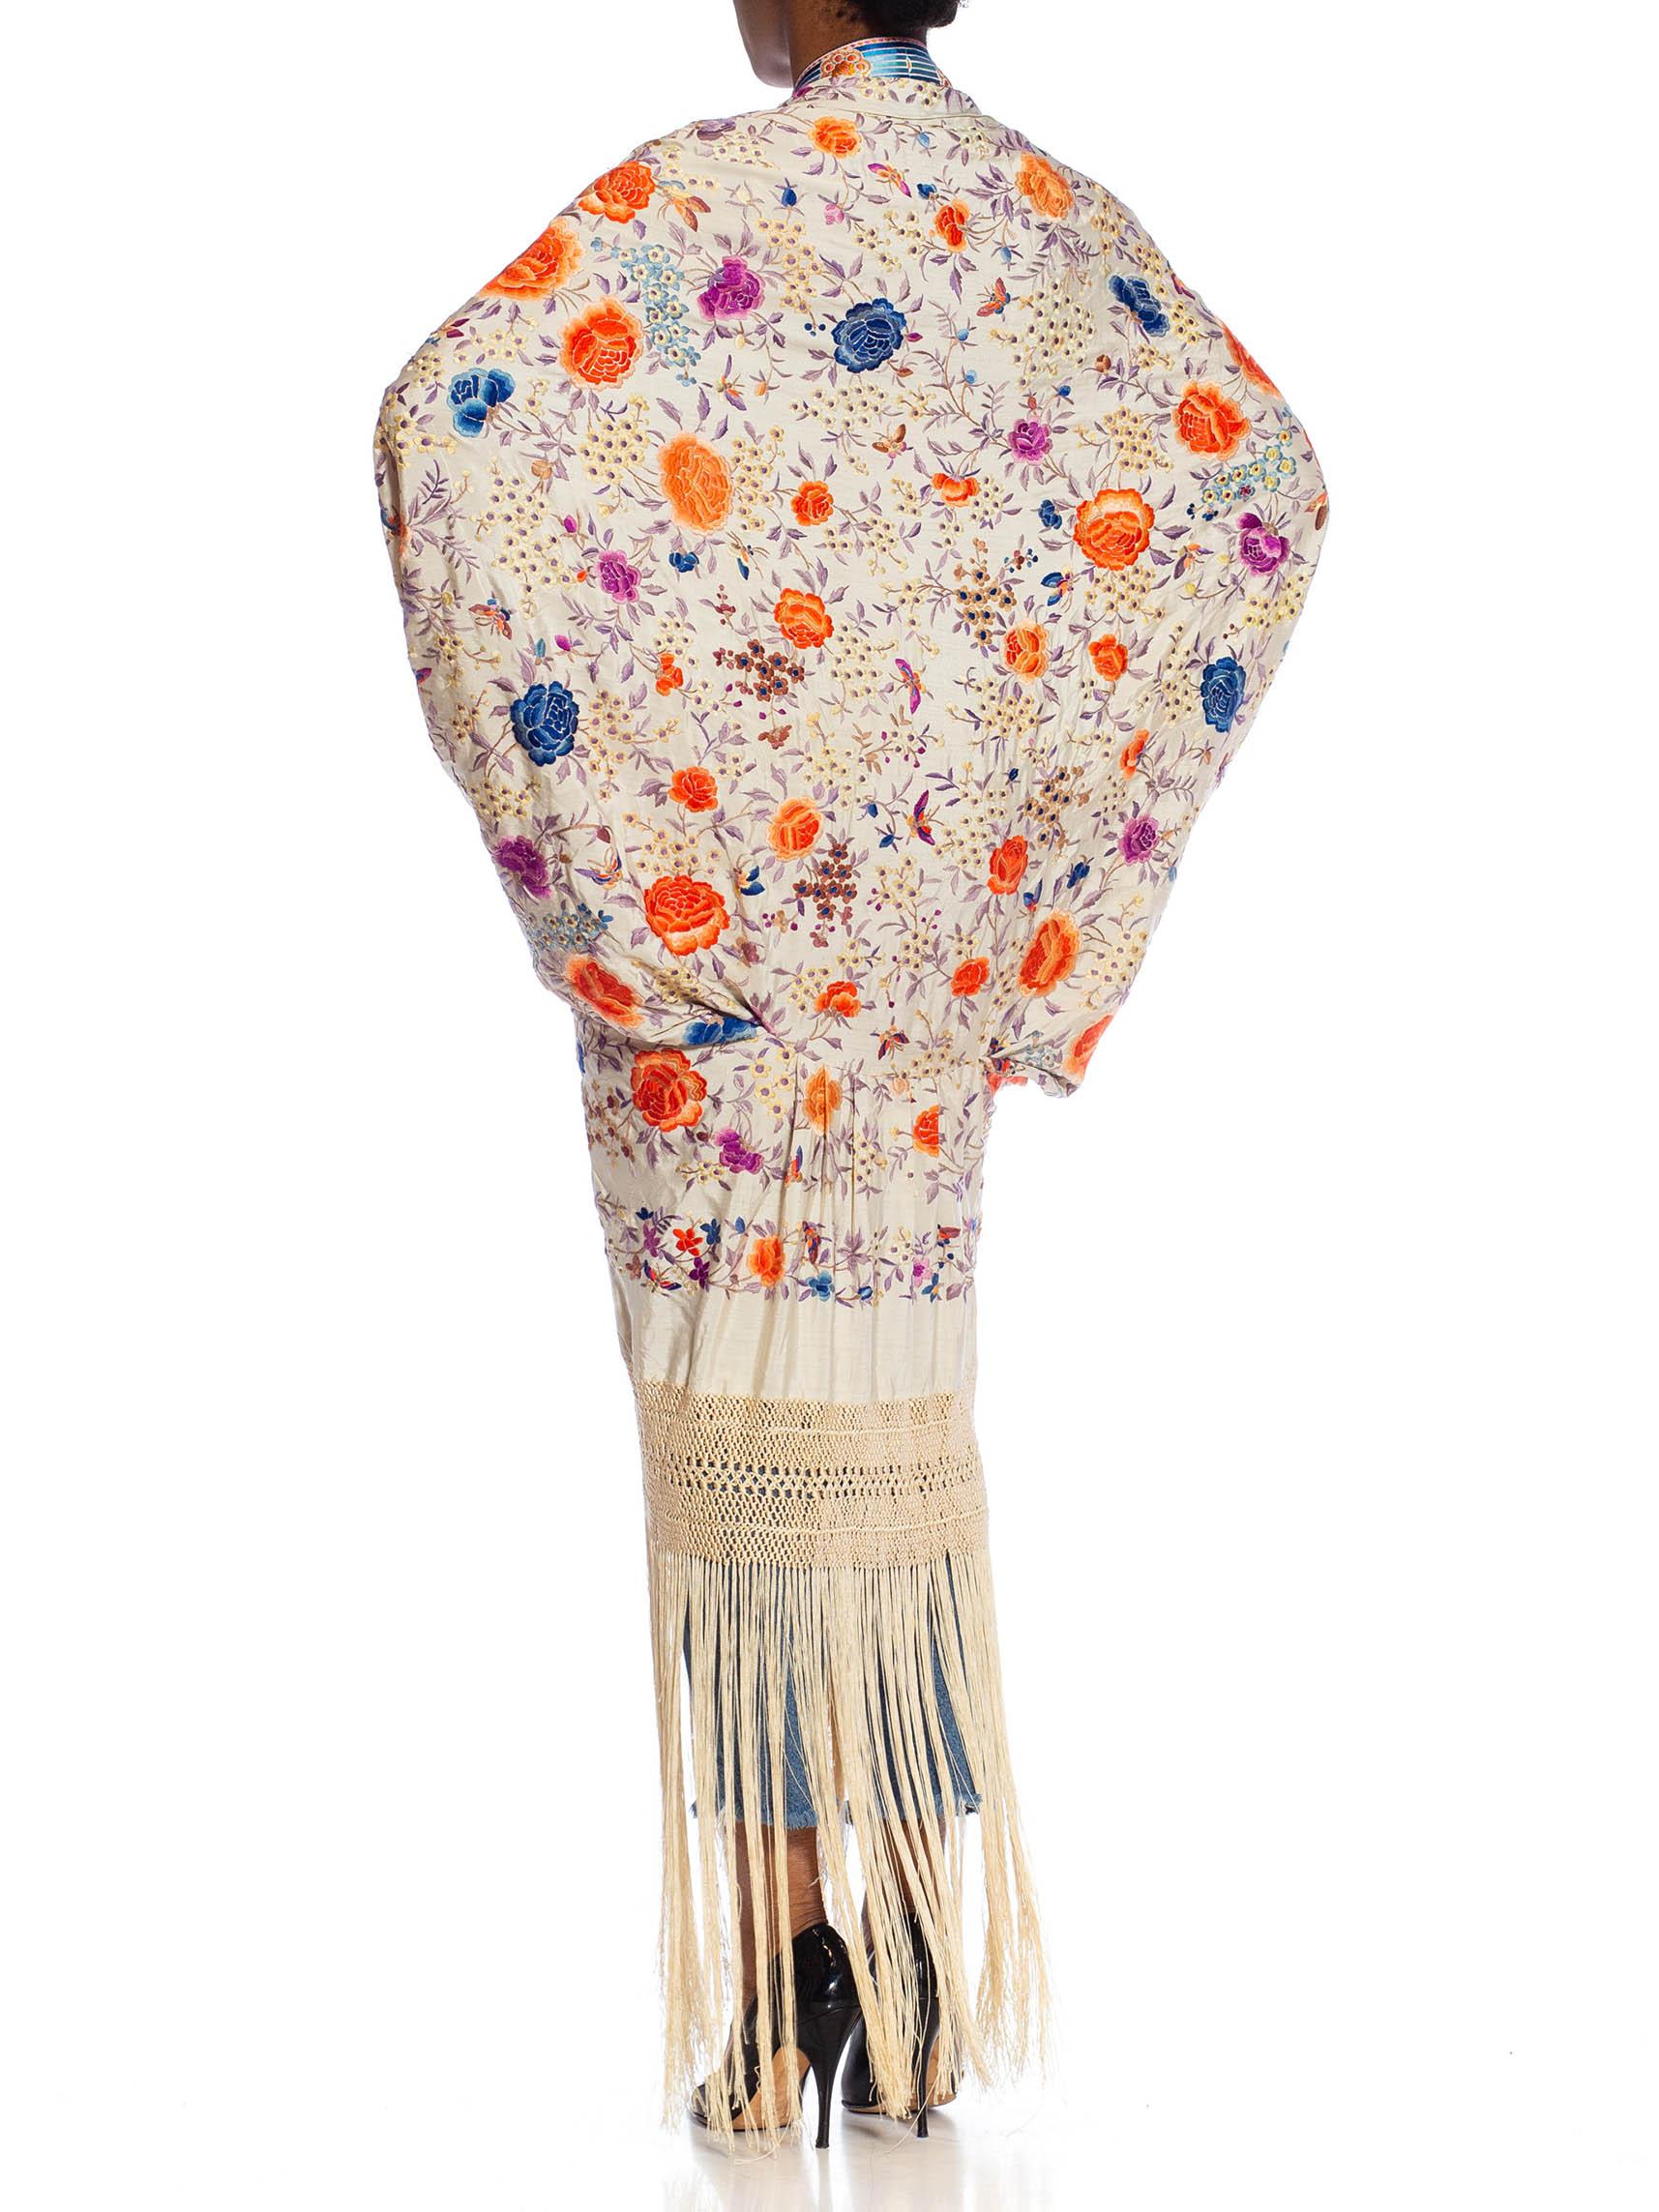 Women's MORPHEW COLLECTION Cream, Orange & Lilac Silk Hand Embroidered Floral Cocoon Wi